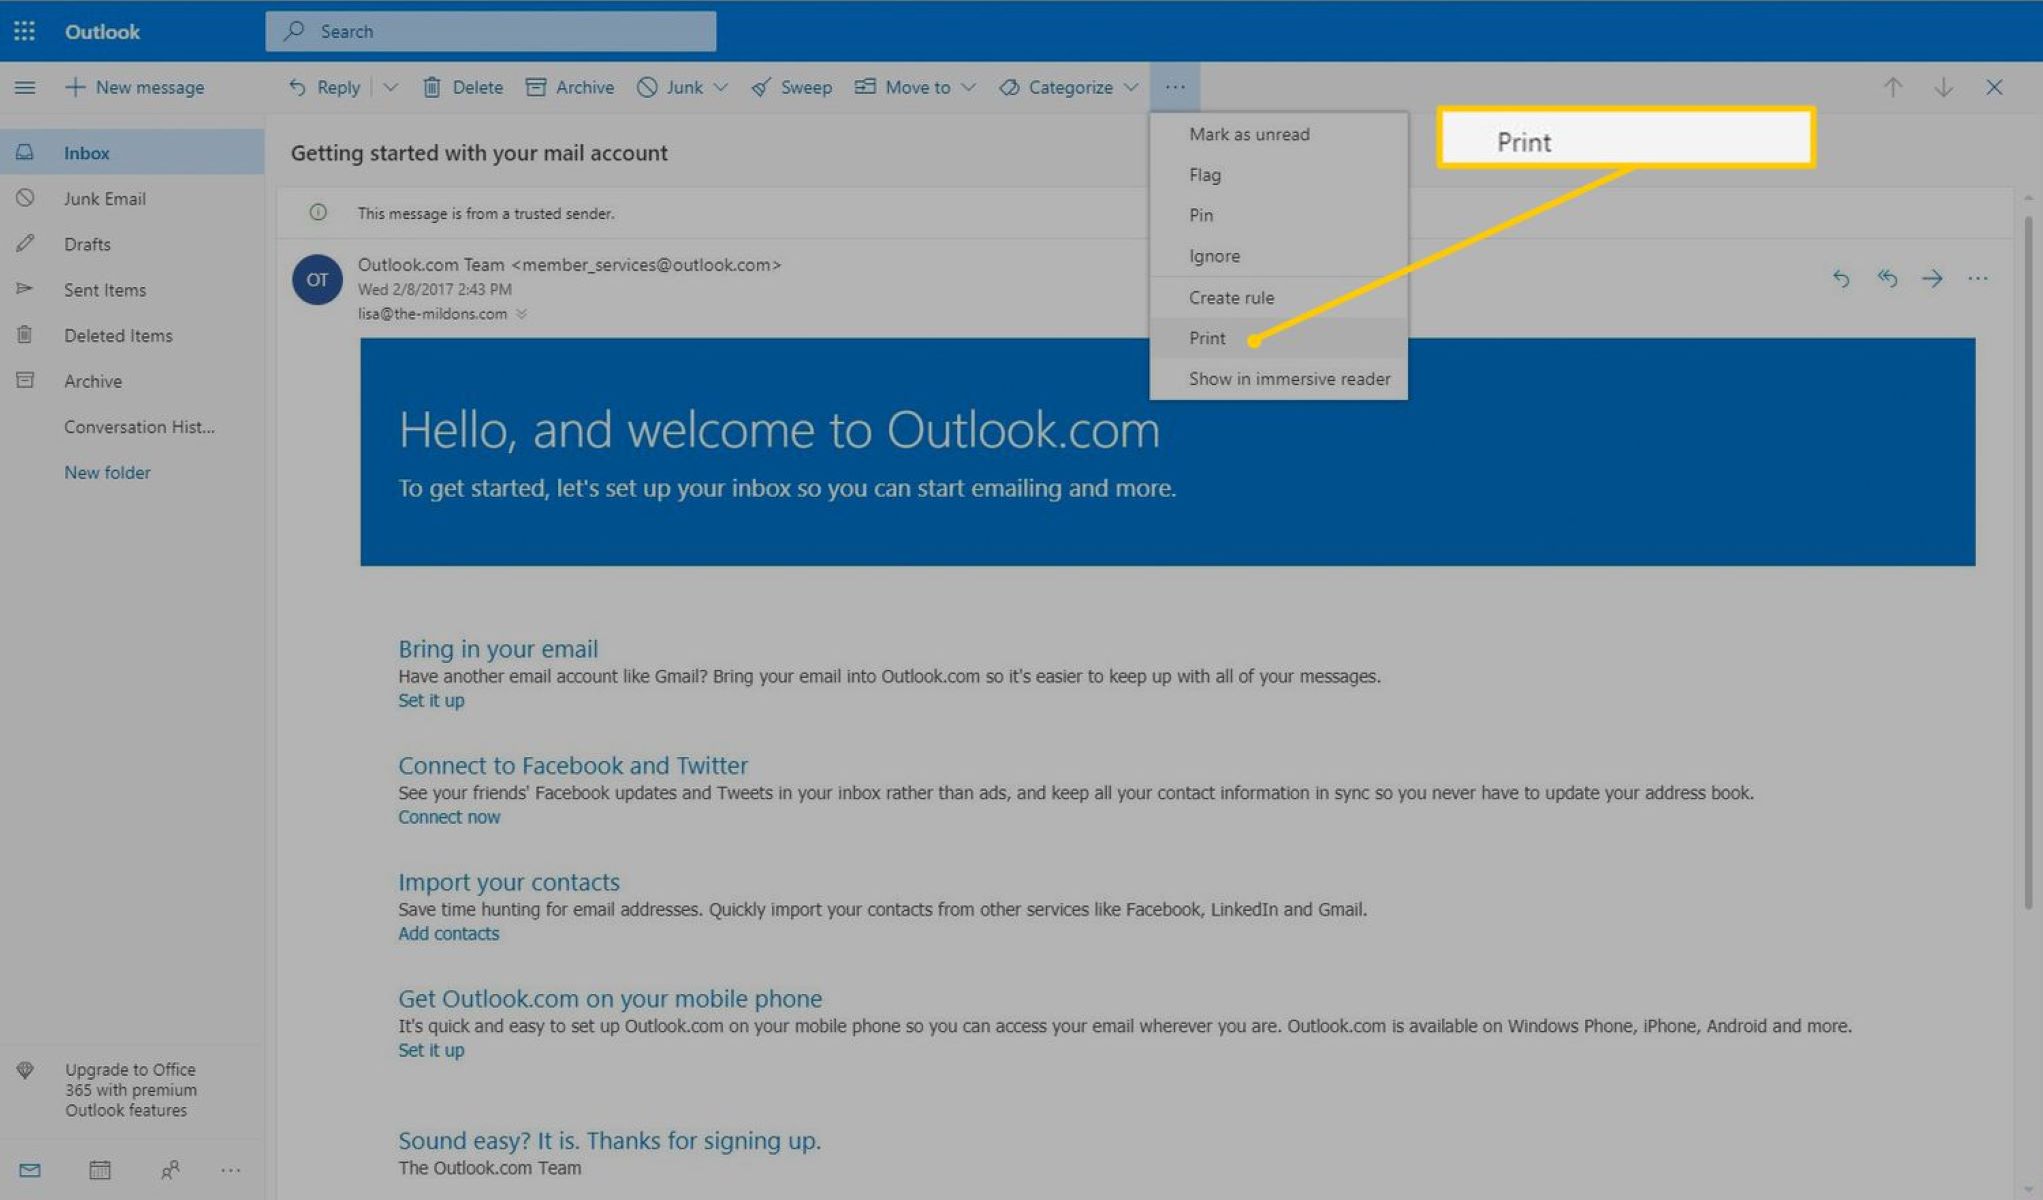 How To Print An Outlook Email